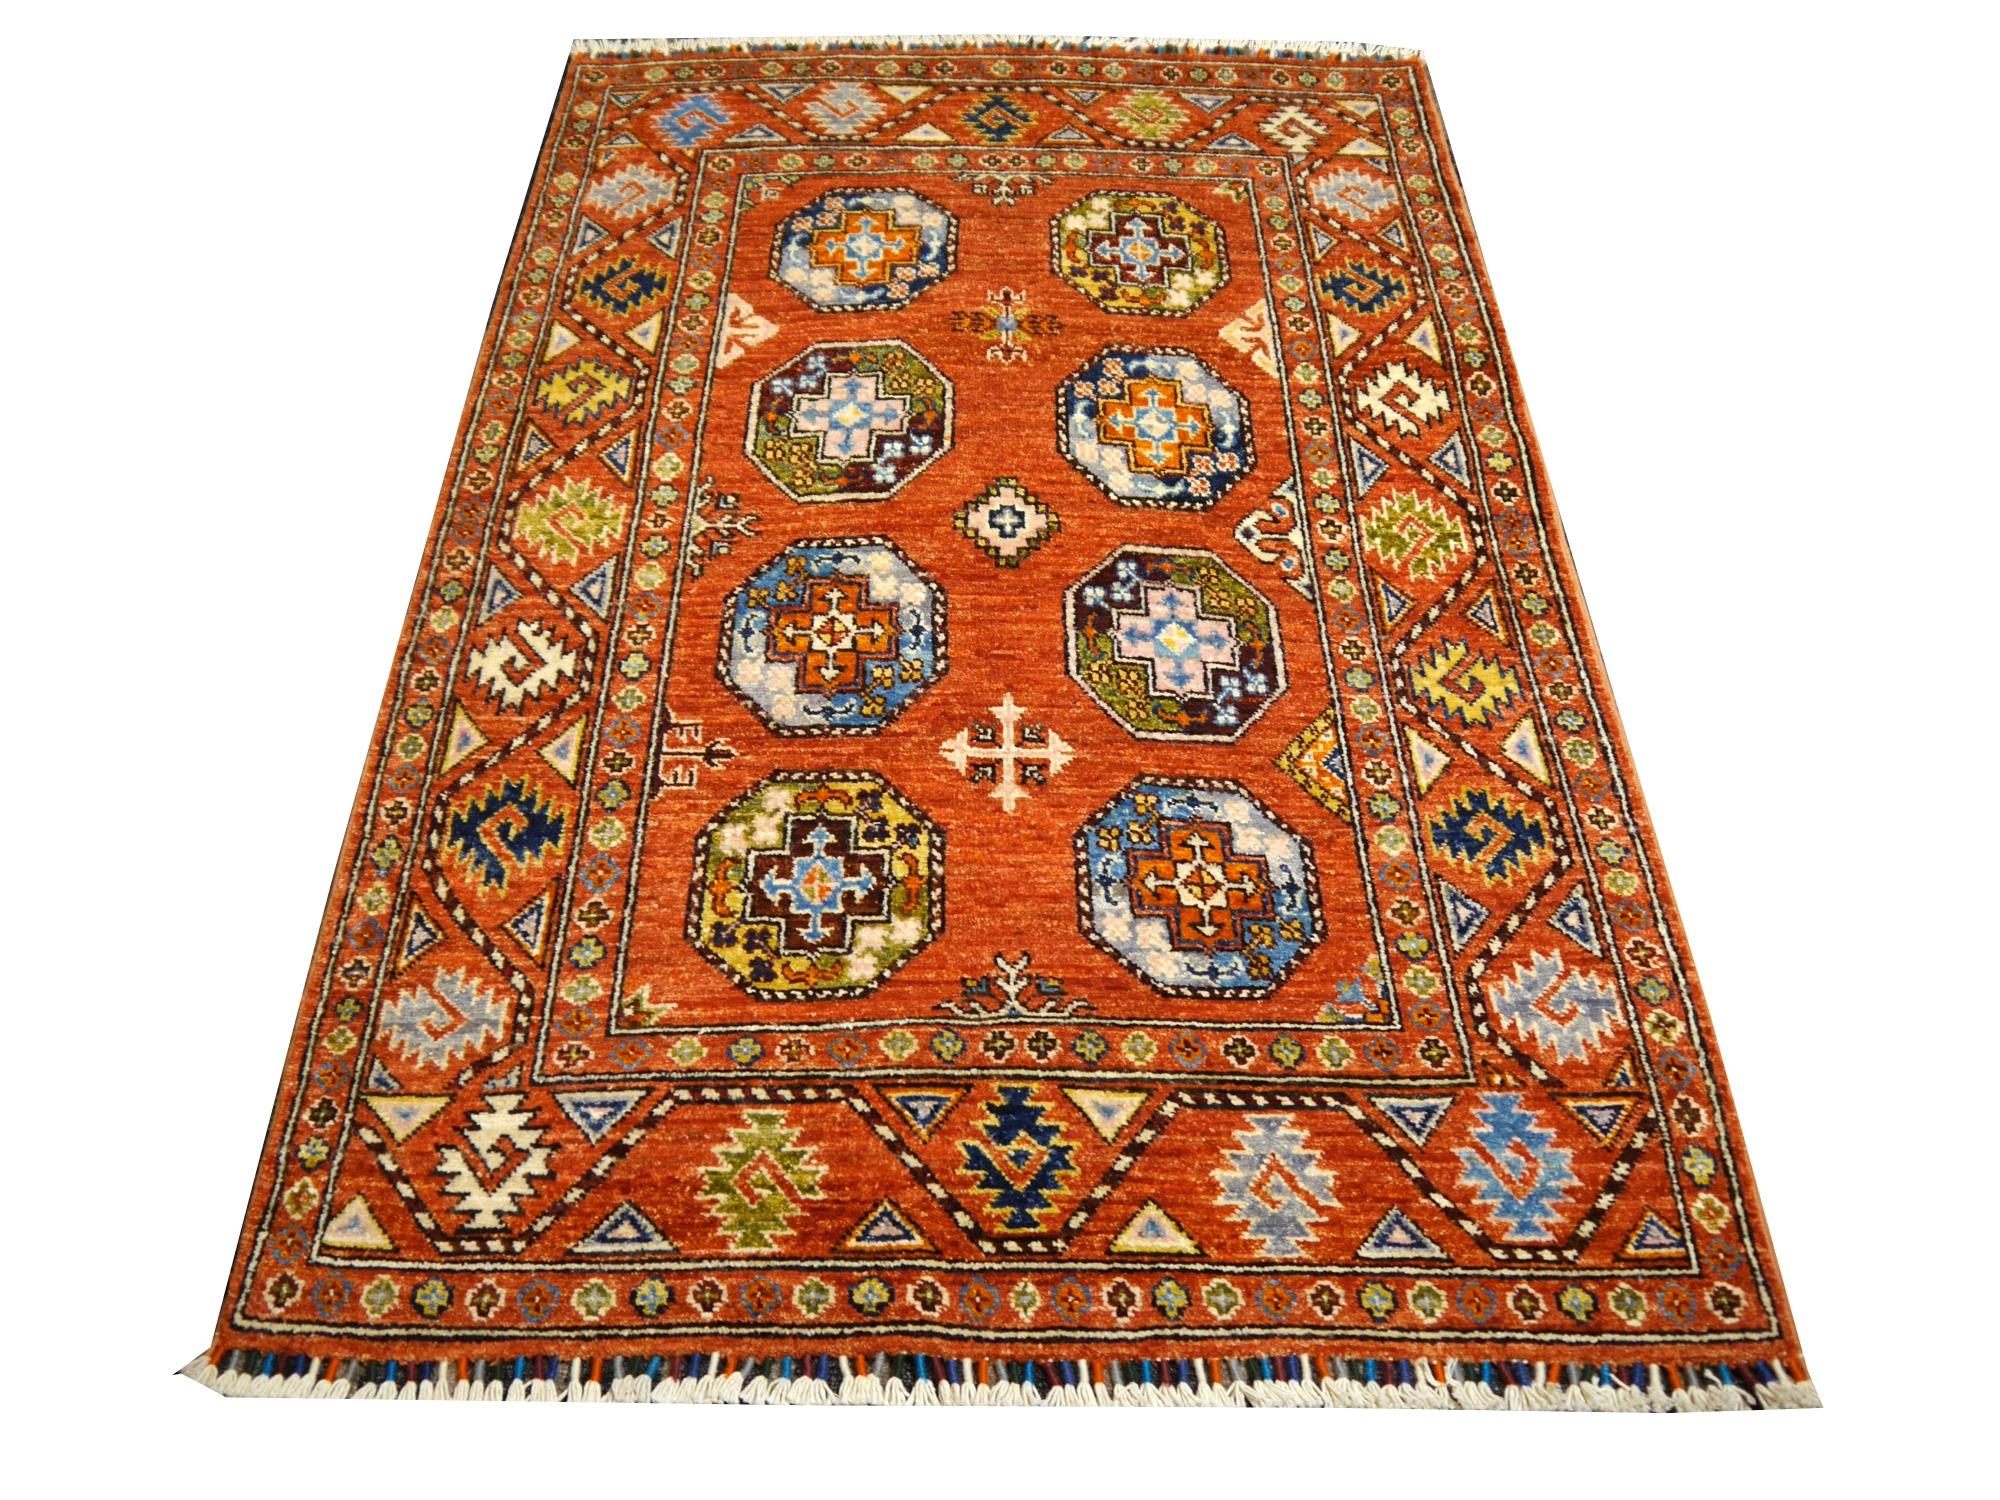 Ersari rug Arijana Afghan 5.1 x 3.3 ft hand-knotted wool
Ersari rugs are made by Turkmen tribes in northern Afghanistan and Uzbekistan.
Arijana carpets are of high quality, have color pigments made from natural plants or minerals and are very